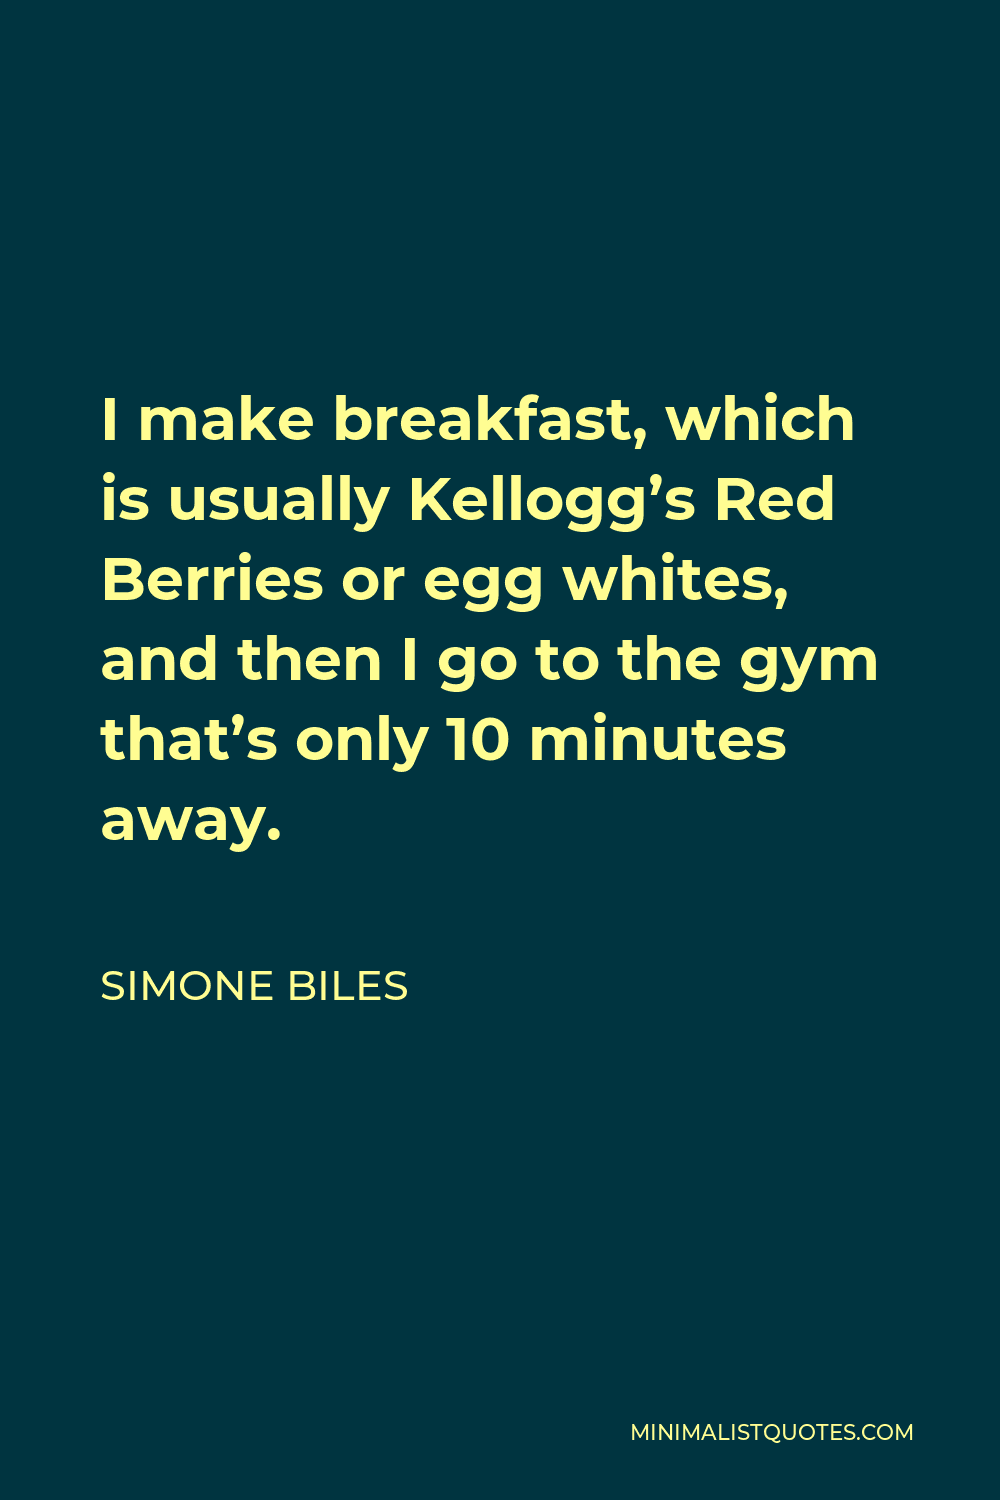 Simone Biles Quote - I make breakfast, which is usually Kellogg’s Red Berries or egg whites, and then I go to the gym that’s only 10 minutes away.